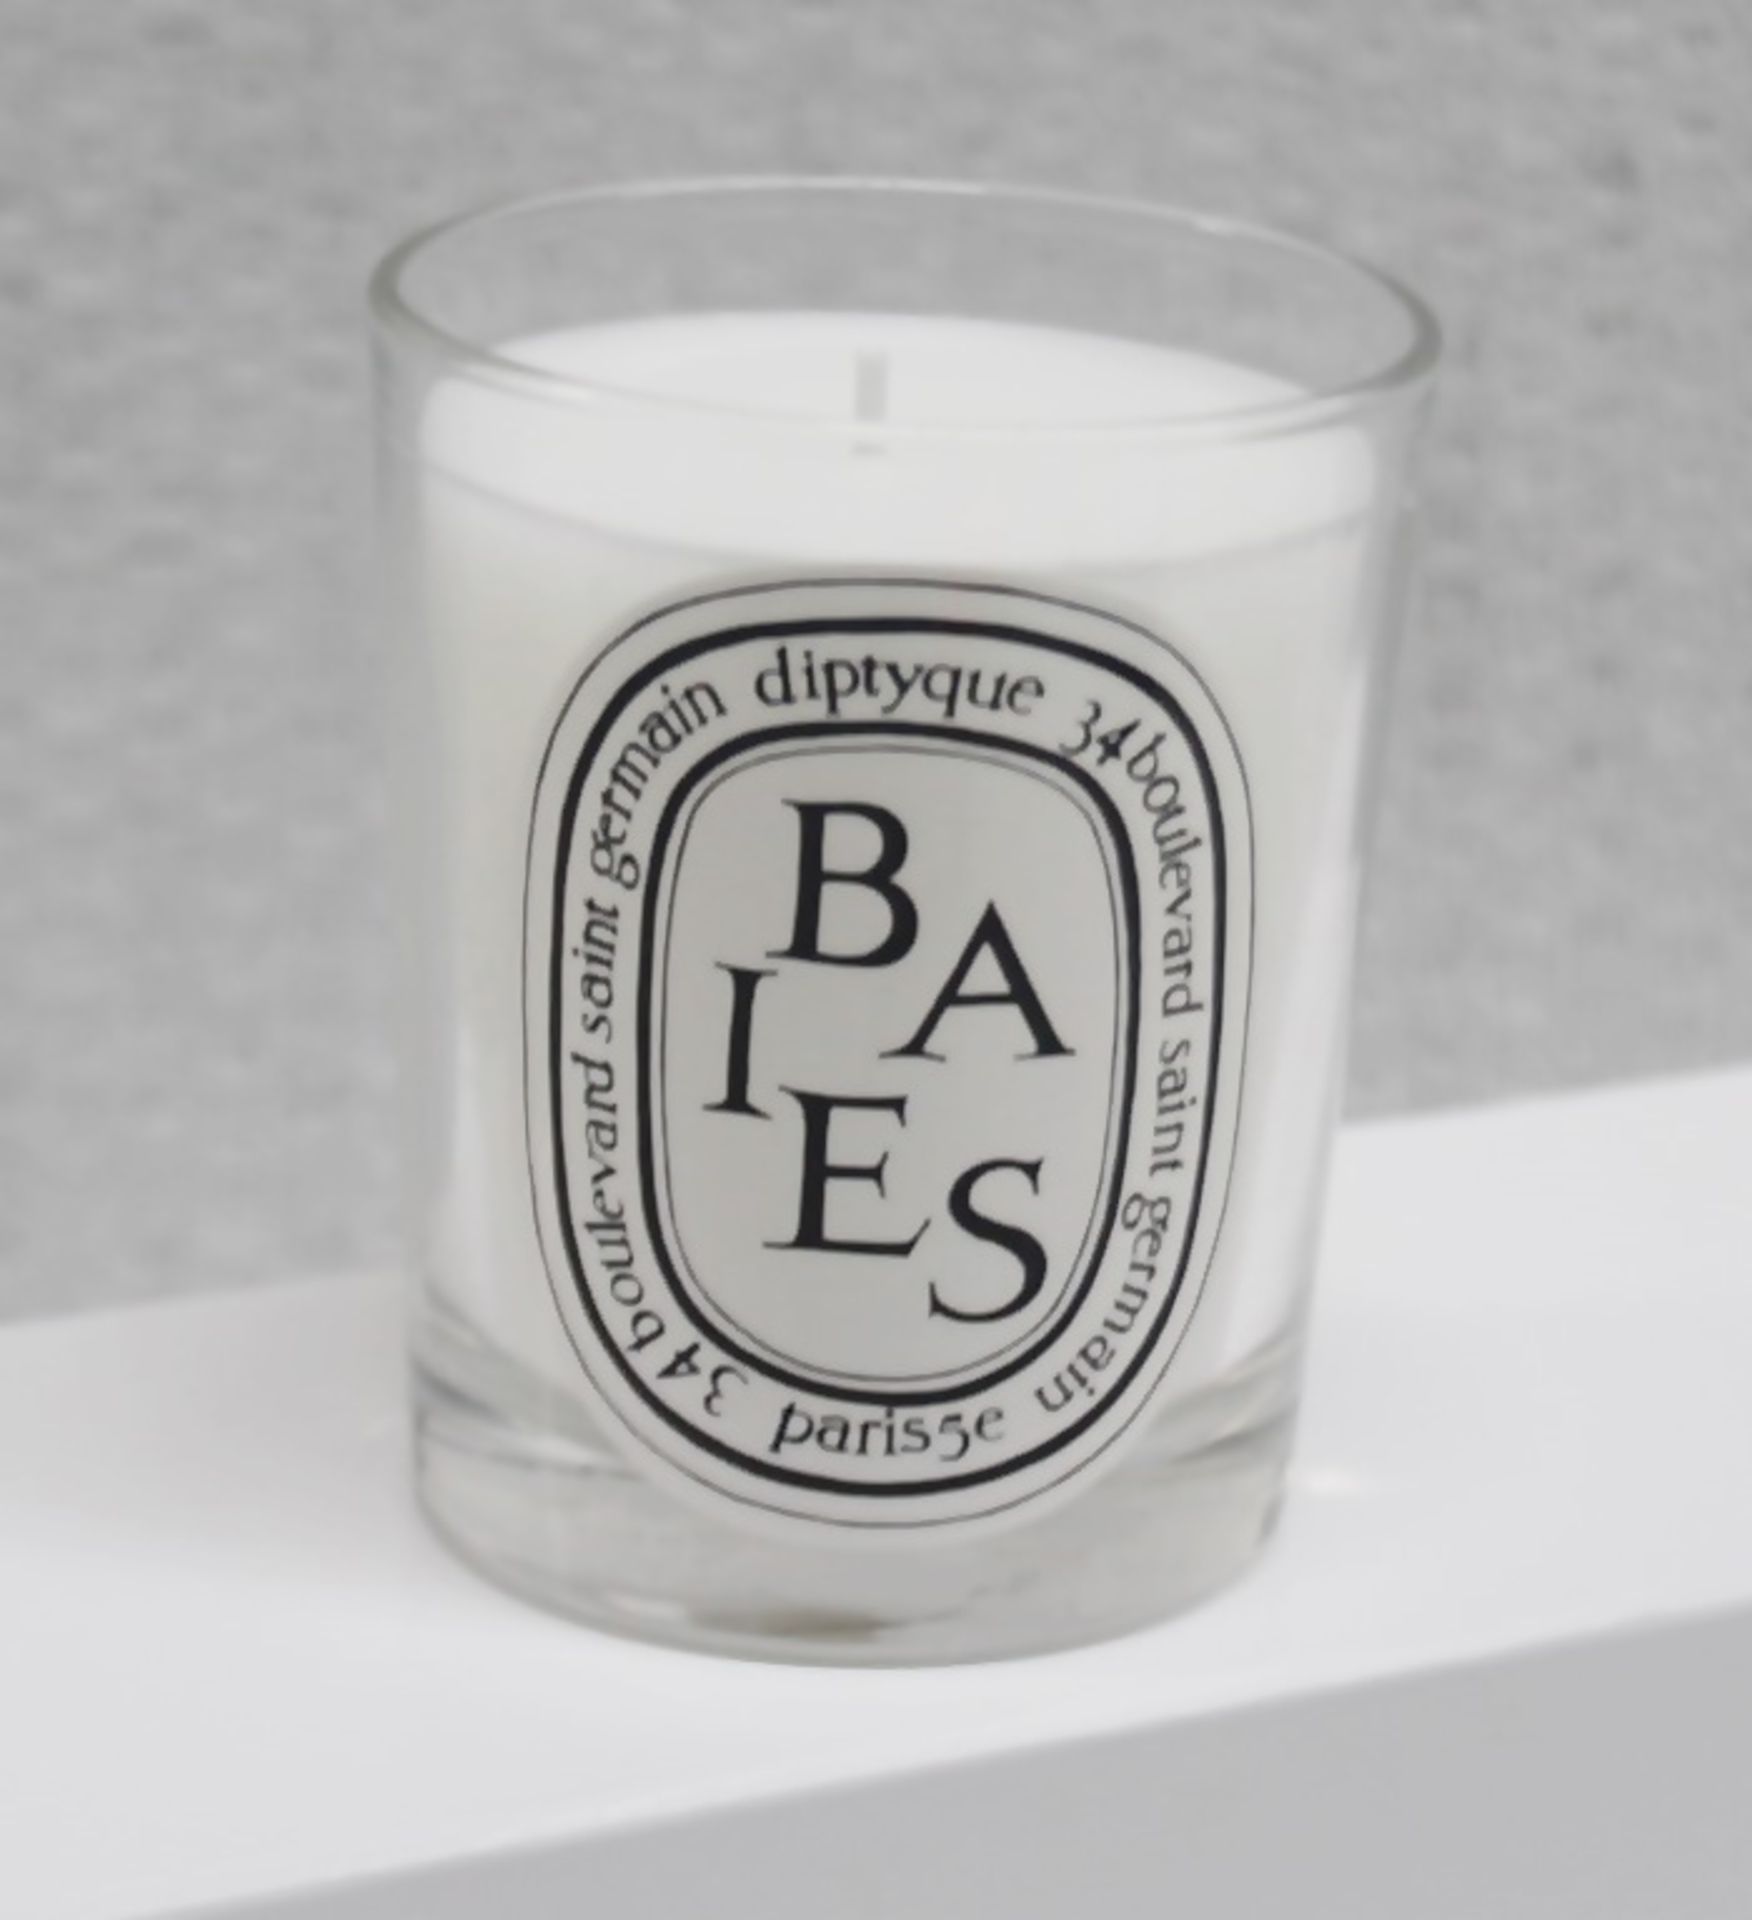 1 x DIPTYQUE Luxury Scented Candle - Baies (Berries) 190G / 6.5Oz - Original Price £54.00 - Image 2 of 5